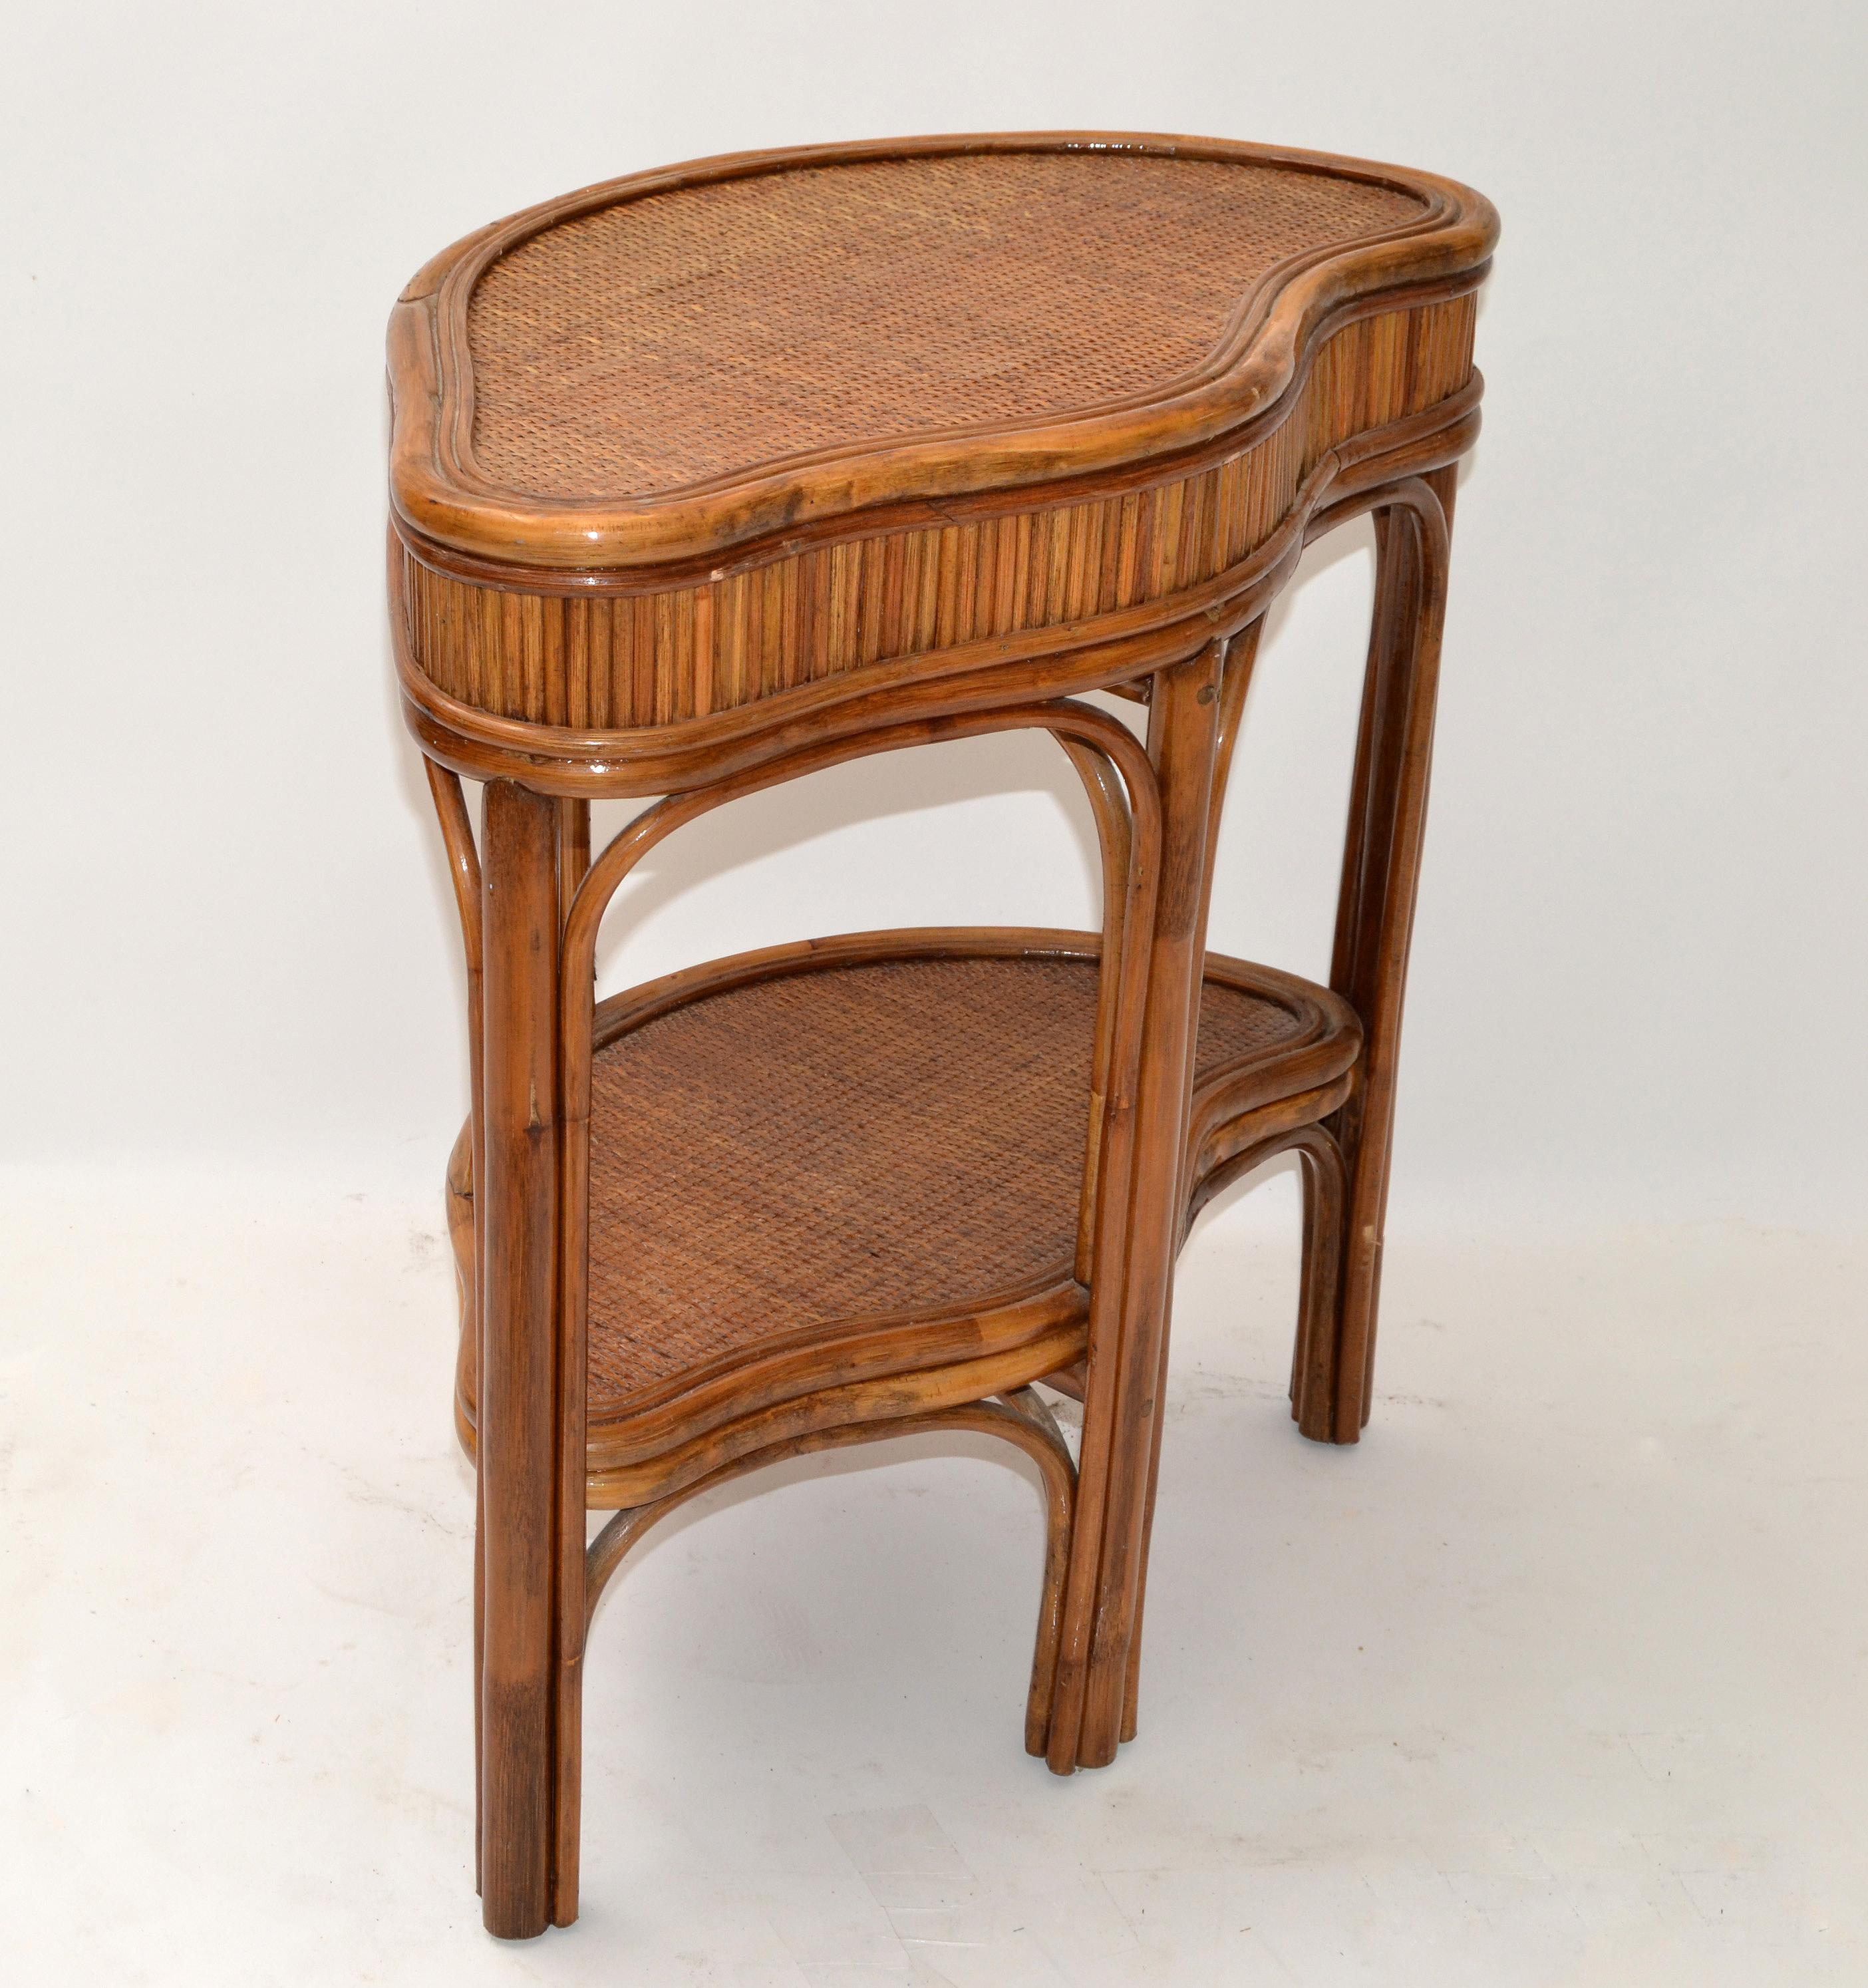 Chinoiserie Bamboo & Rattan Handmade Two-Tier Side, End Table Asian Modern 70s For Sale 3